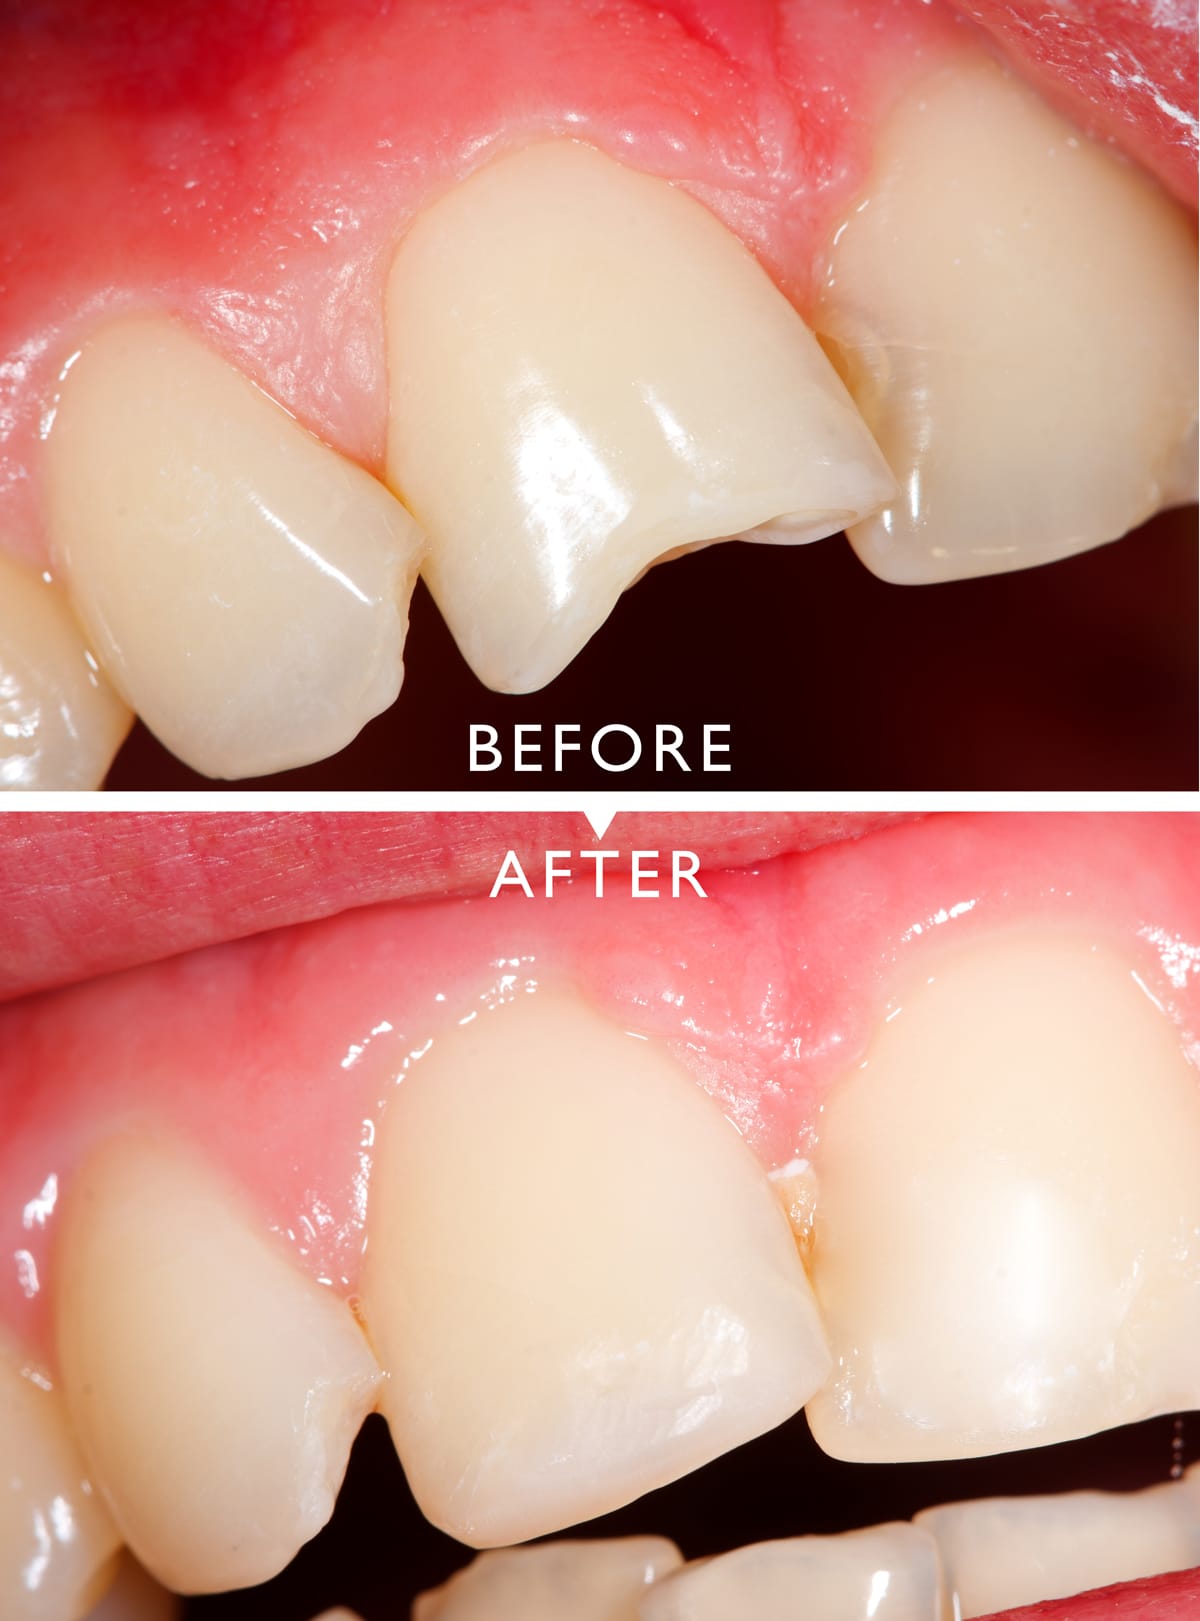 How to fix a chipped front tooth